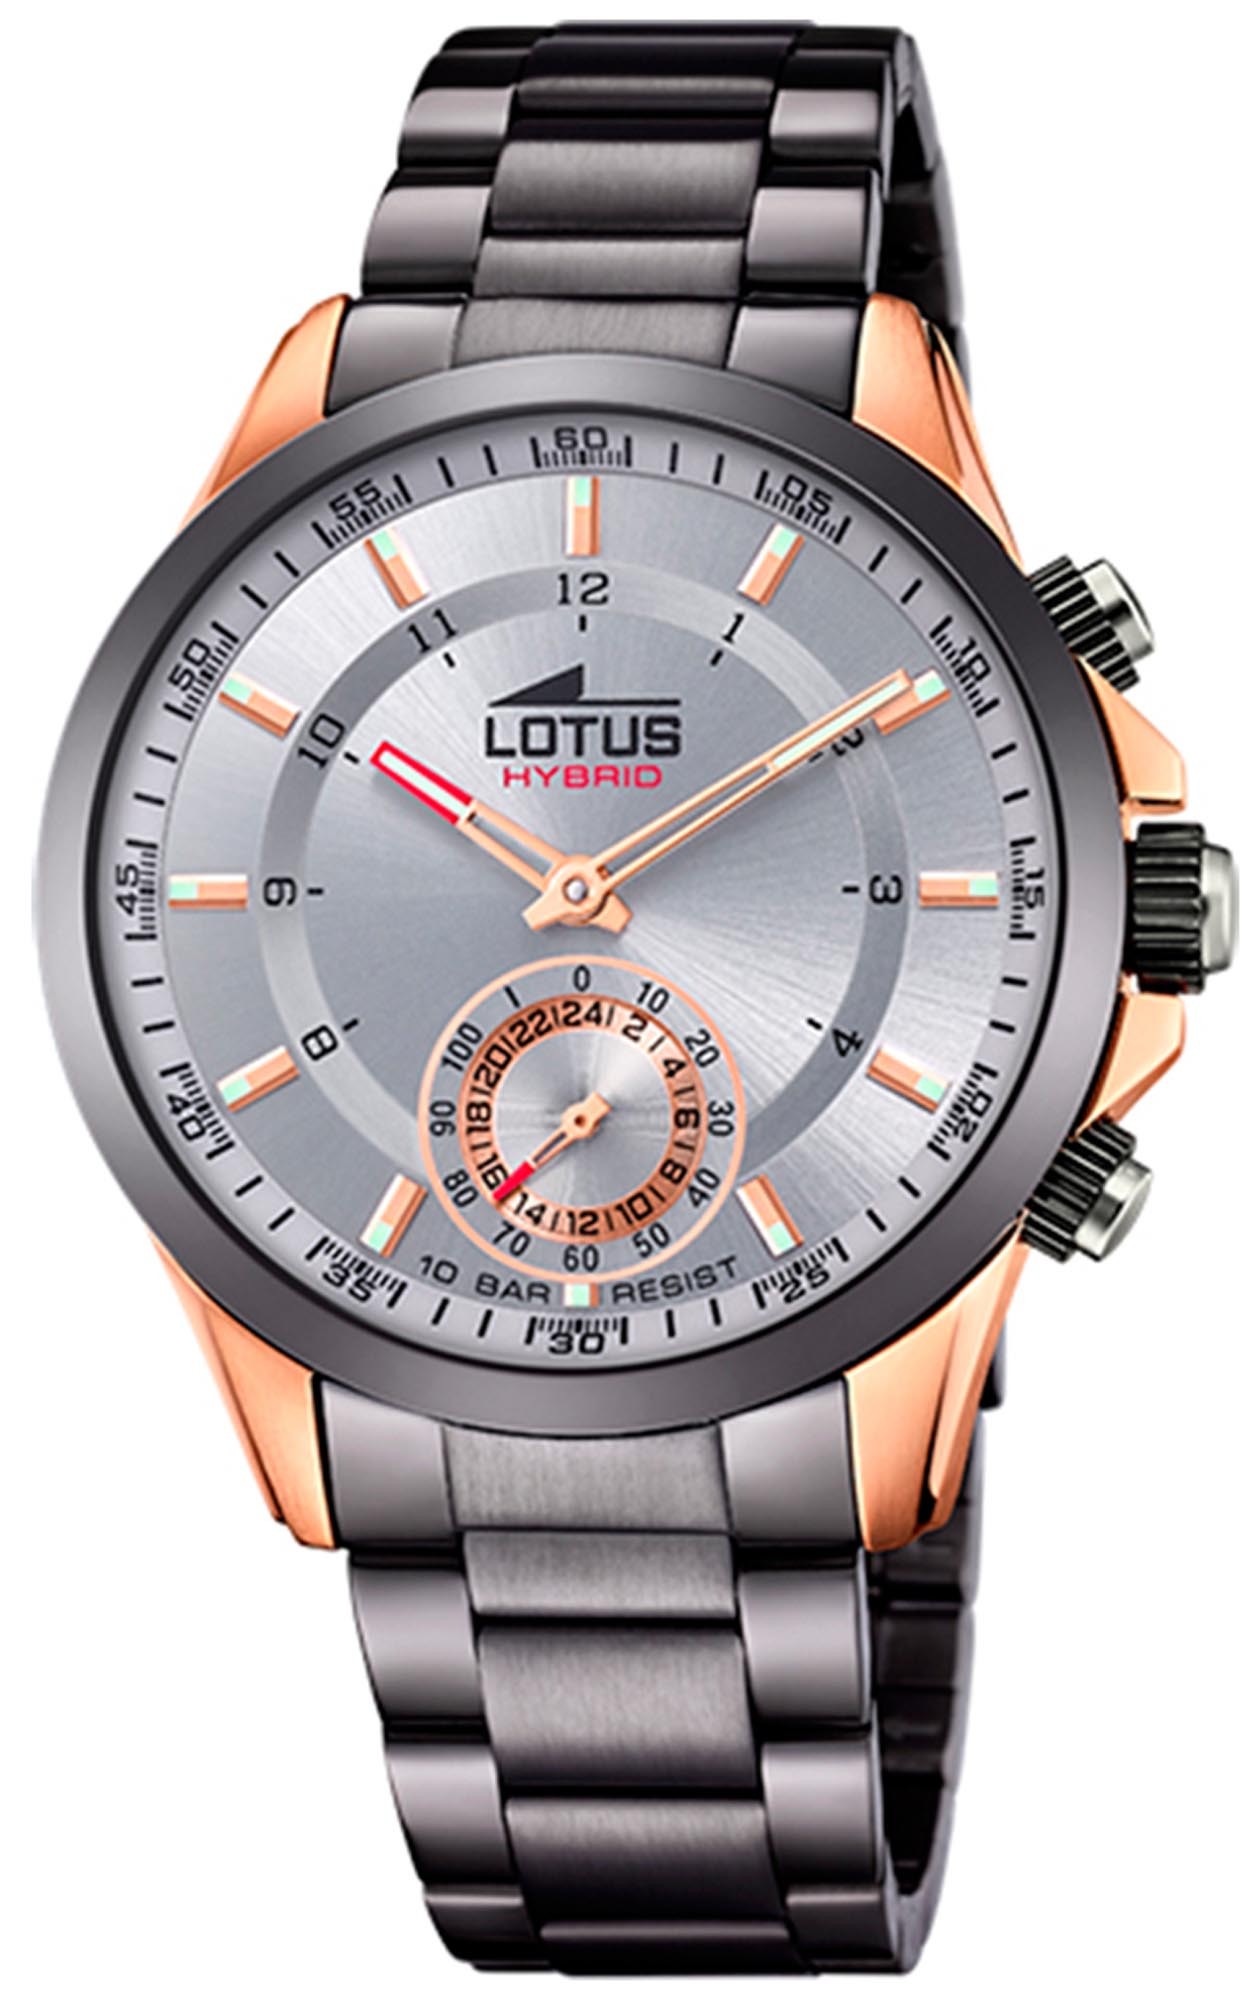 Lotus Men\'s Watch Lotus Hybrid 18808/1 Watch with Stainless Steel Case  Analog Display Dial and Metal Strap 150828 18808/1 | Comprar Watch Lotus  Hybrid 18808/1 Watch with Stainless Steel Case Analog Display